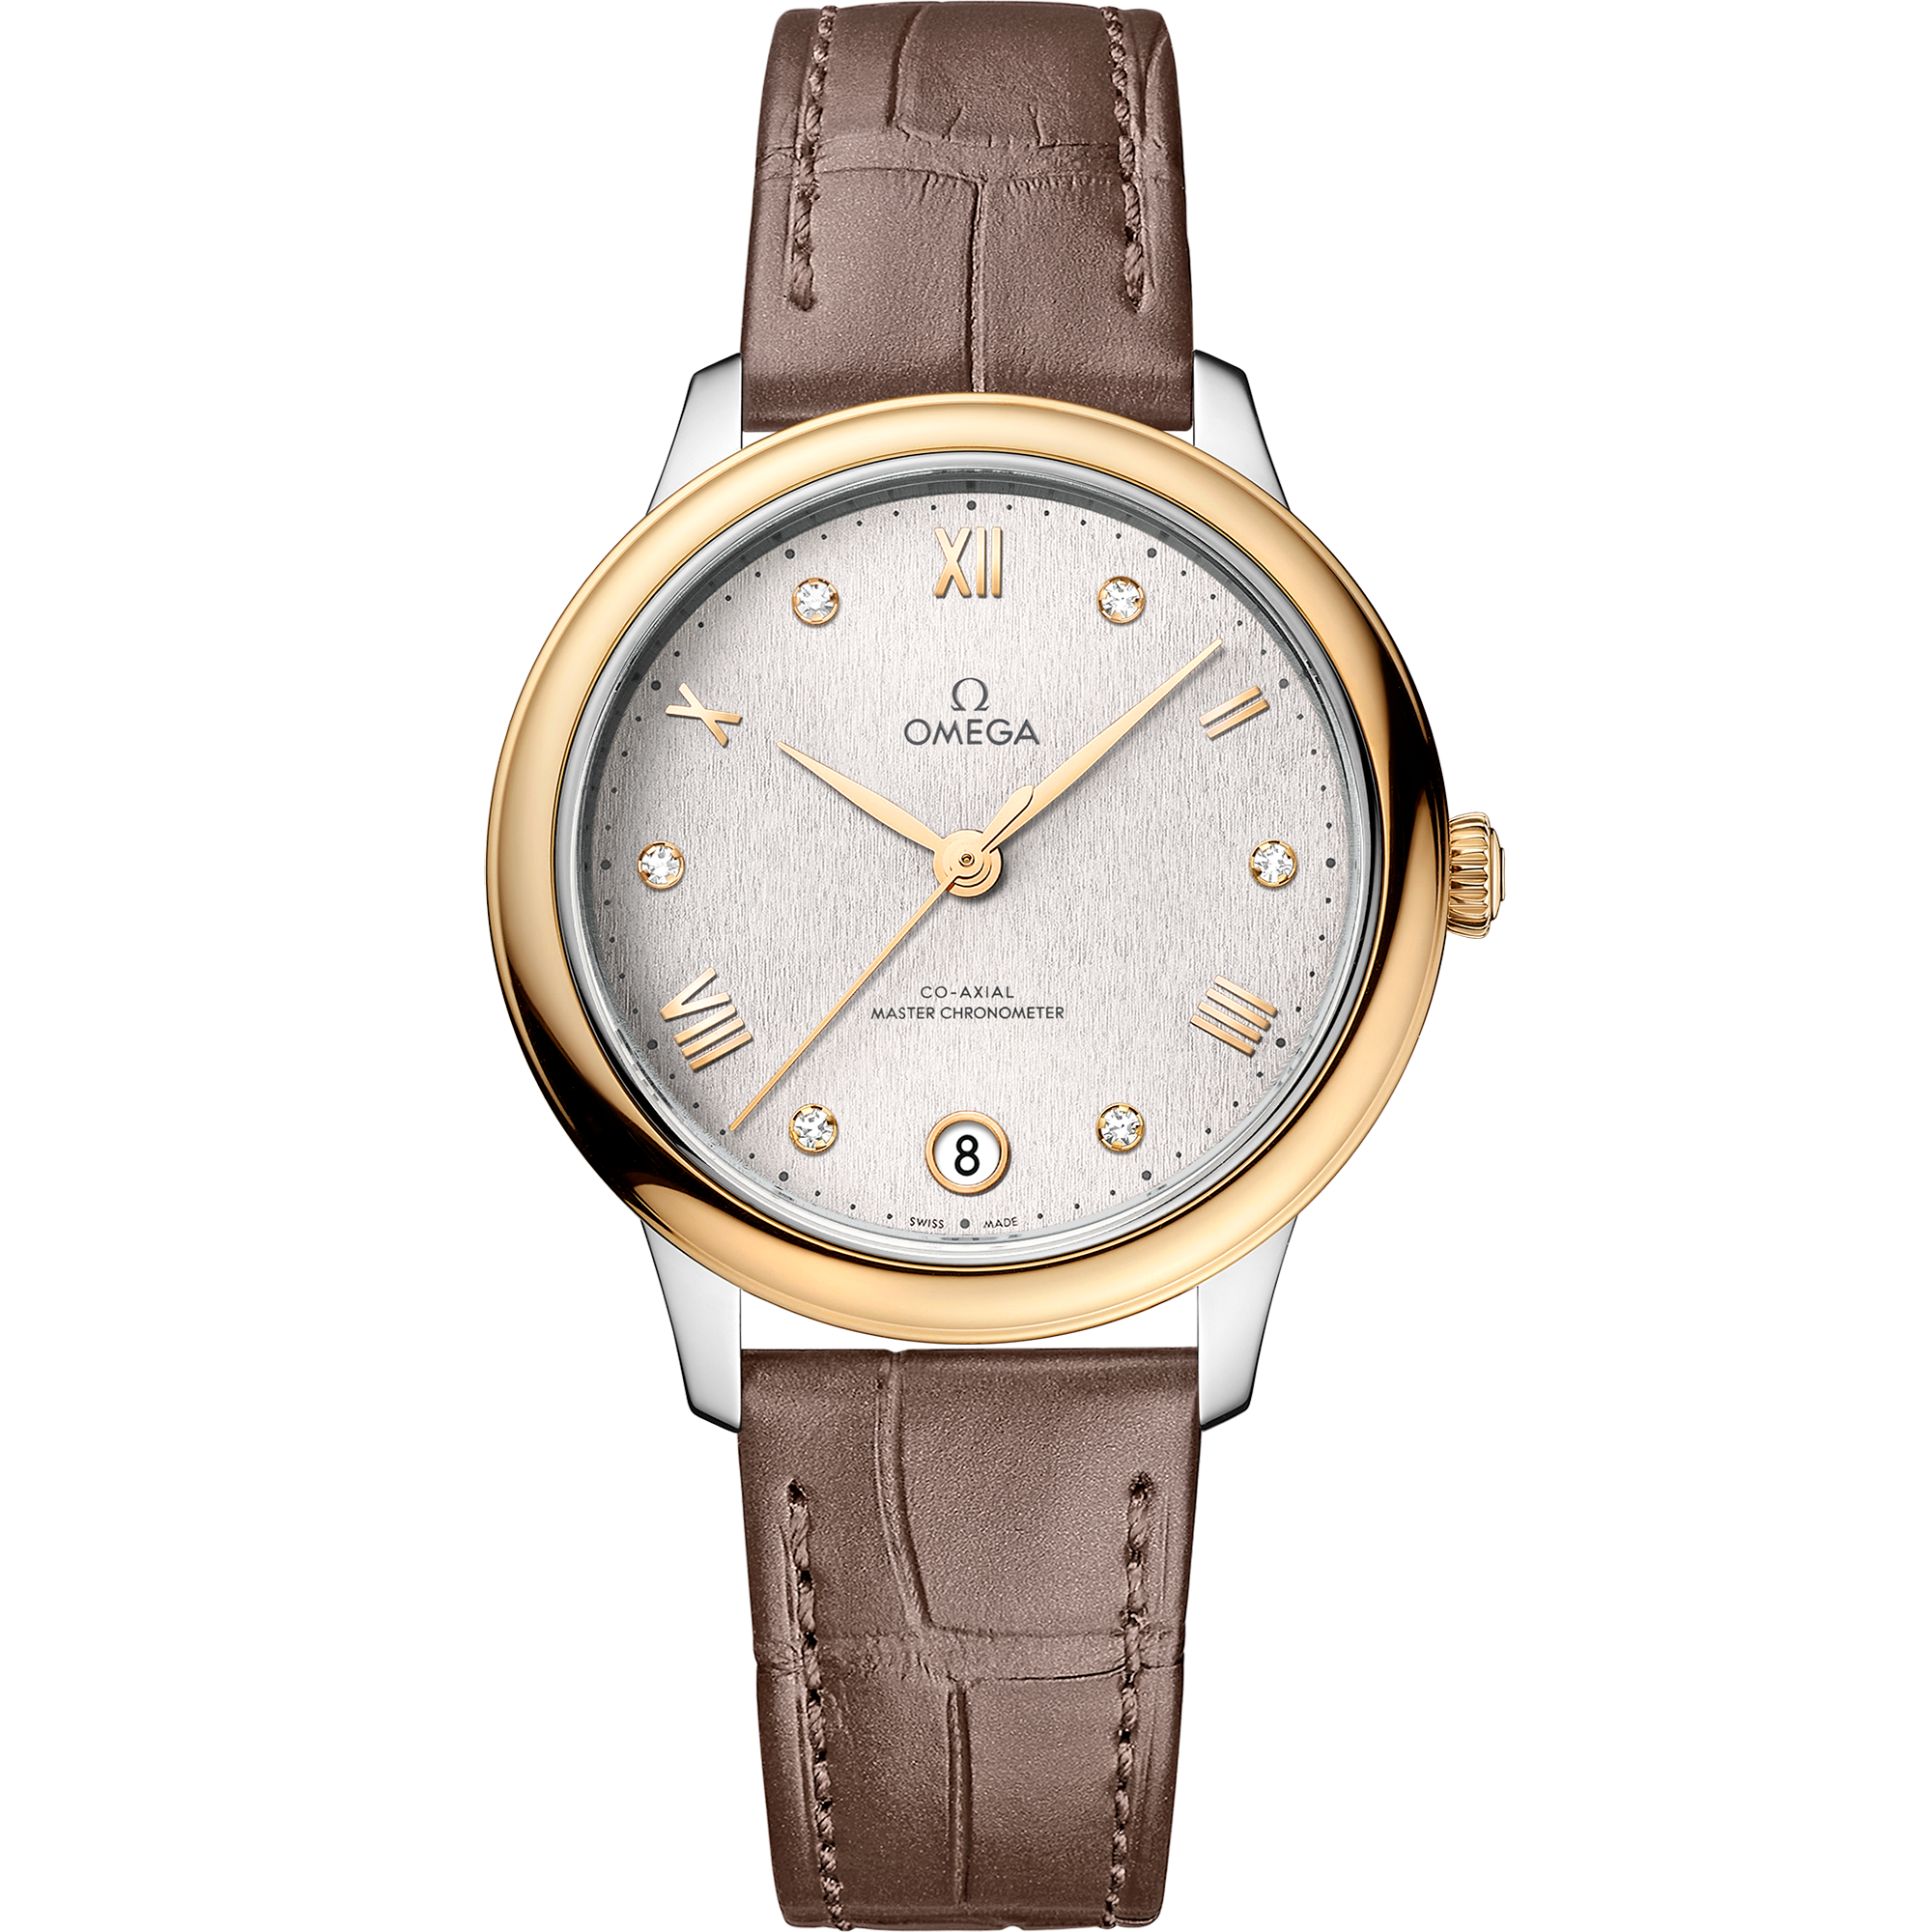 De Ville 34 mm, steel - yellow gold on leather strap - 434.23.34.20.52.002